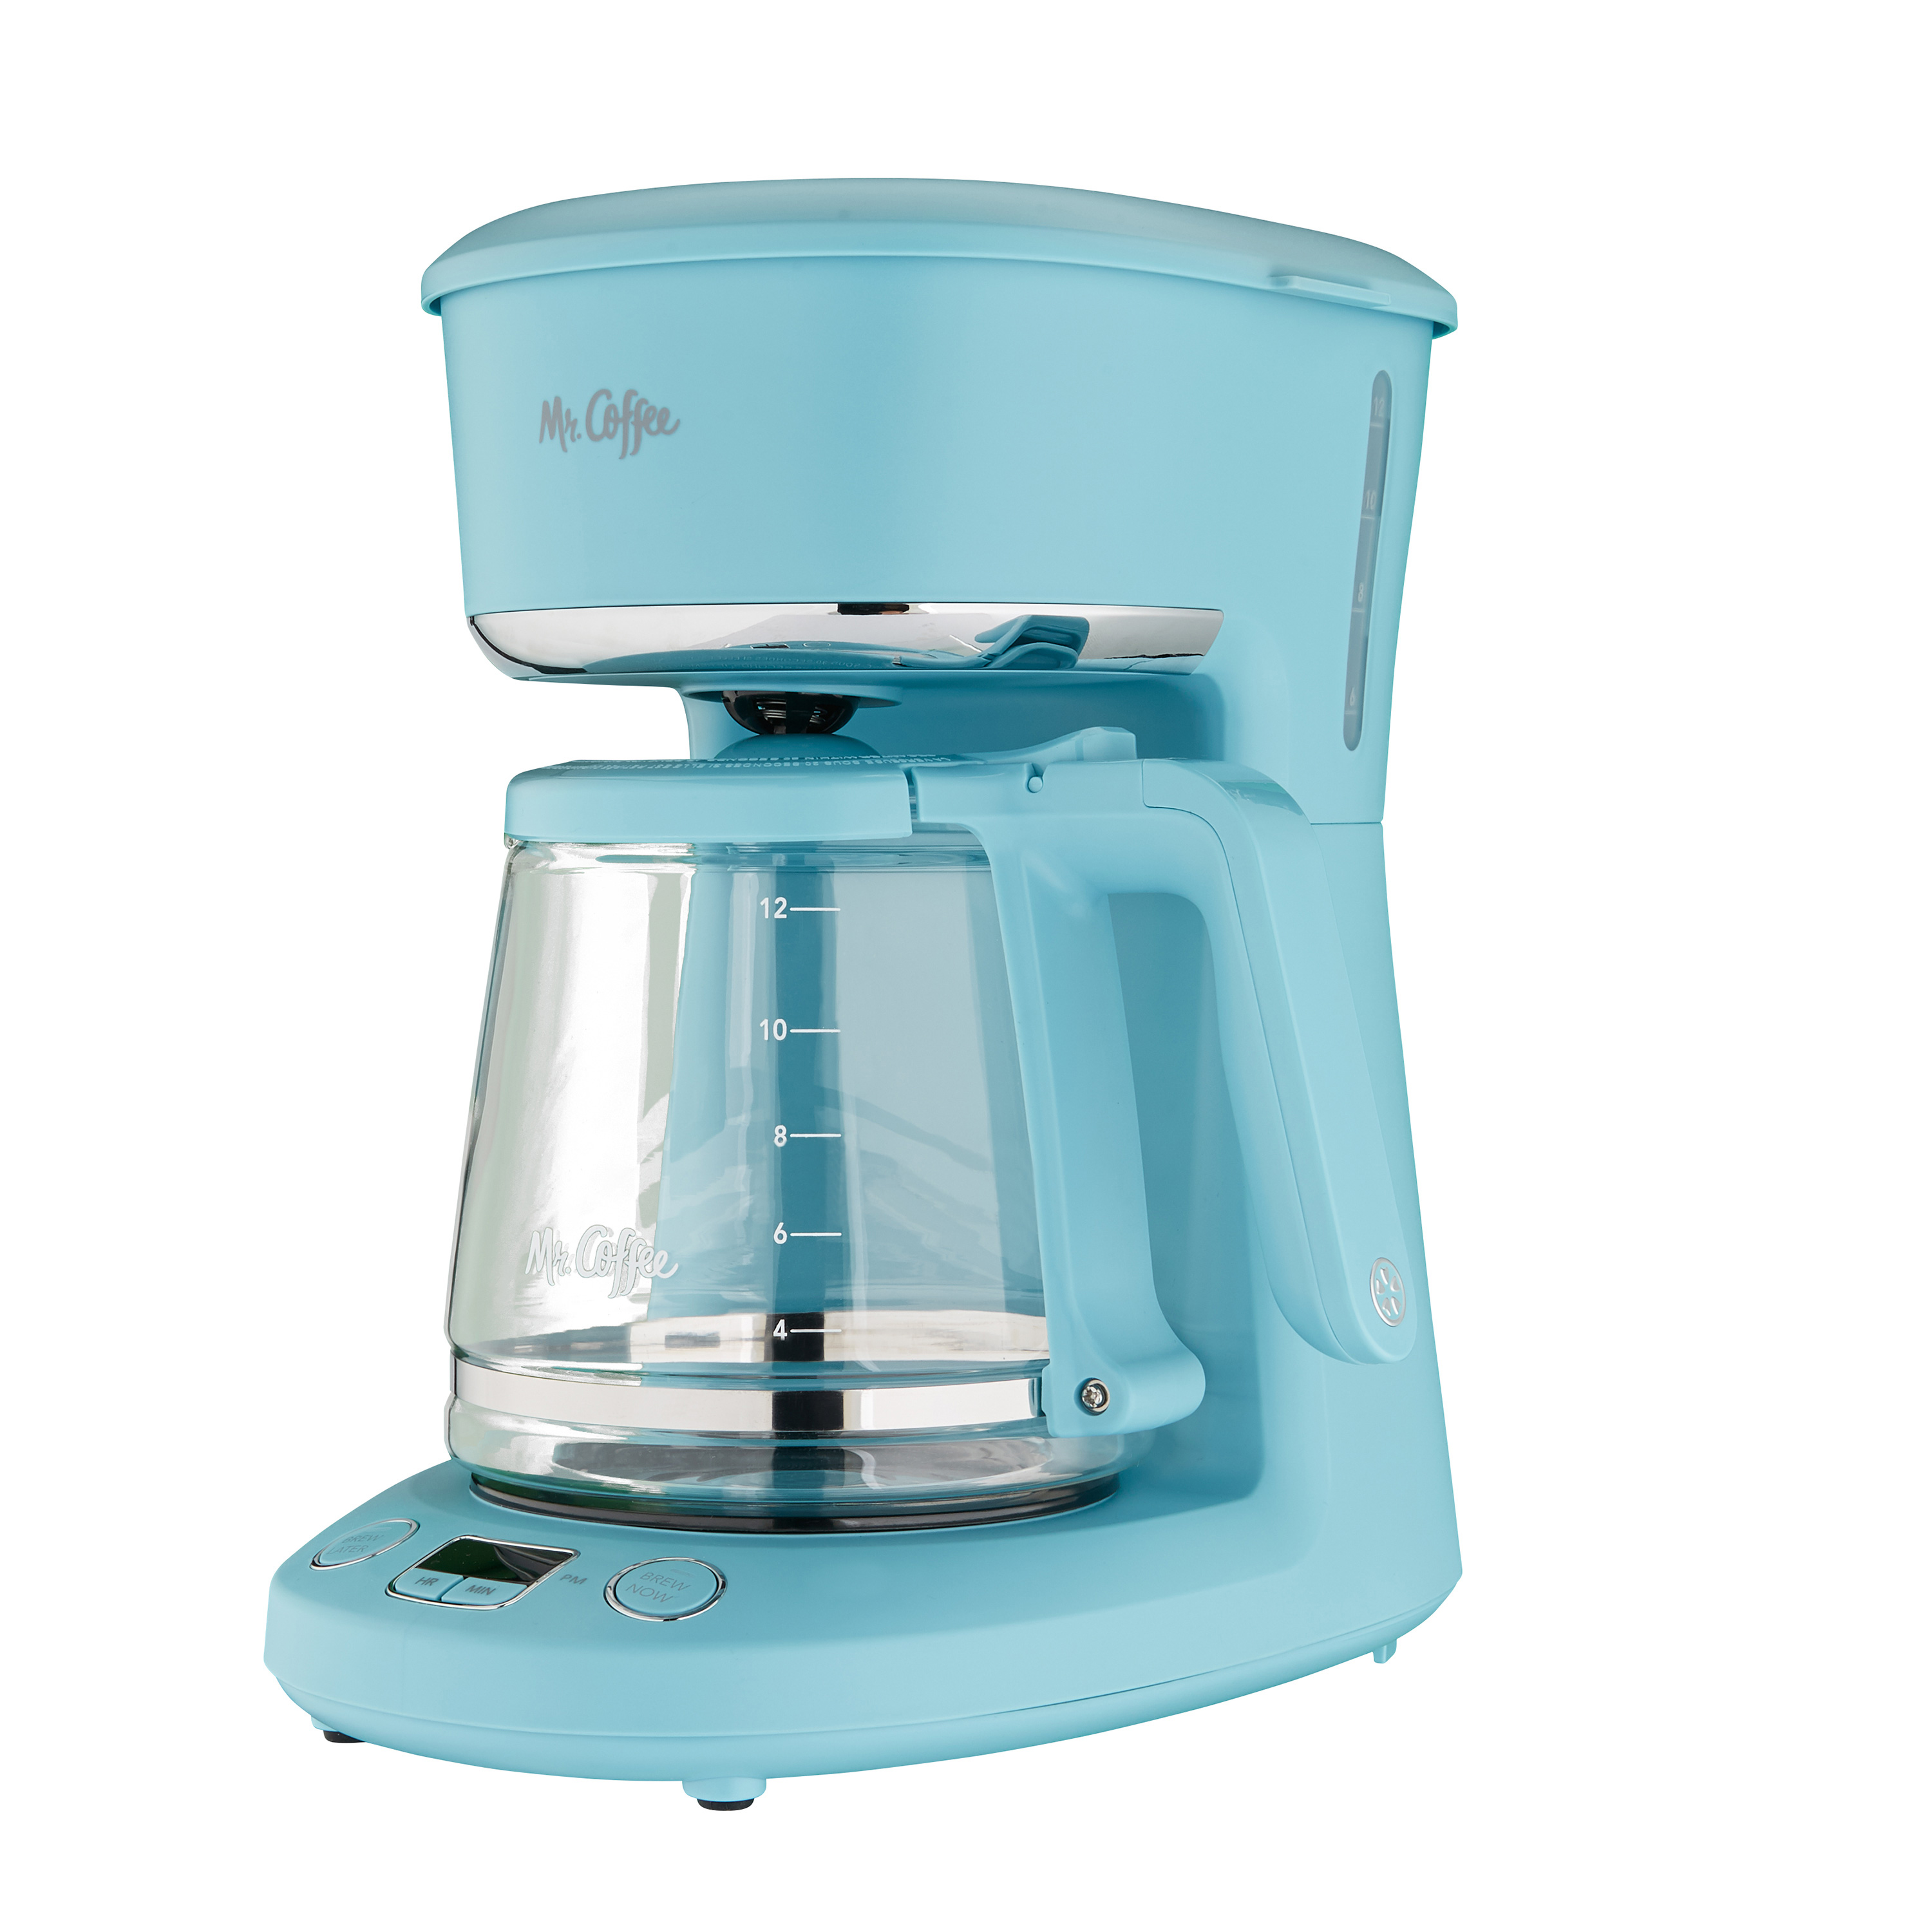 Mr. Coffee 12-Cup Programmable Coffeemaker, Arctic Blue, Brew Now or Later - image 2 of 5